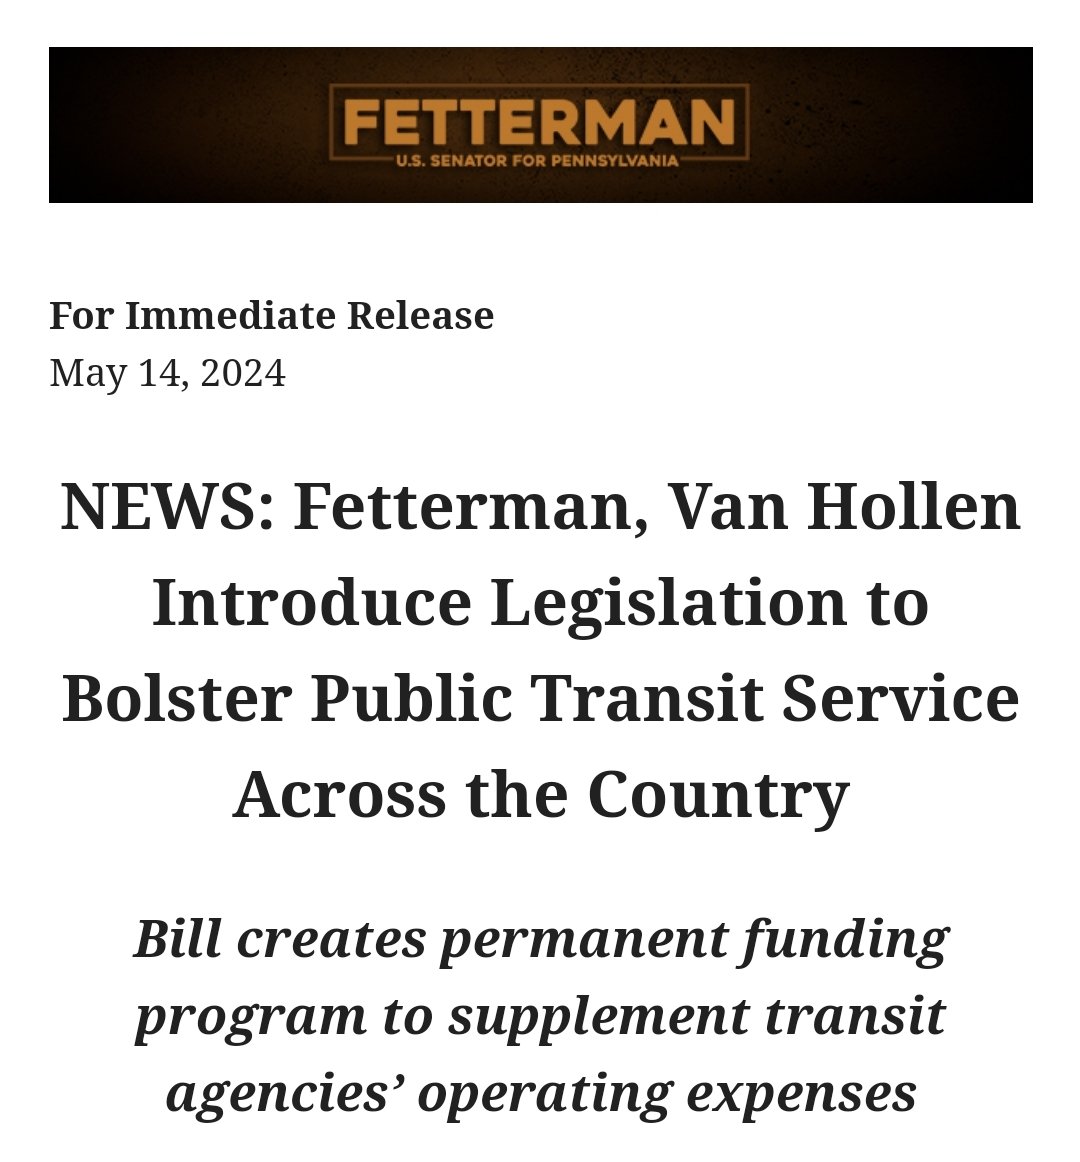 @SenFettermanPA, and Senator Van Hollen Introduce Legislation to Bolster Public Transit Service Across the Country. If passed this would be a game changer for @SEPTA.